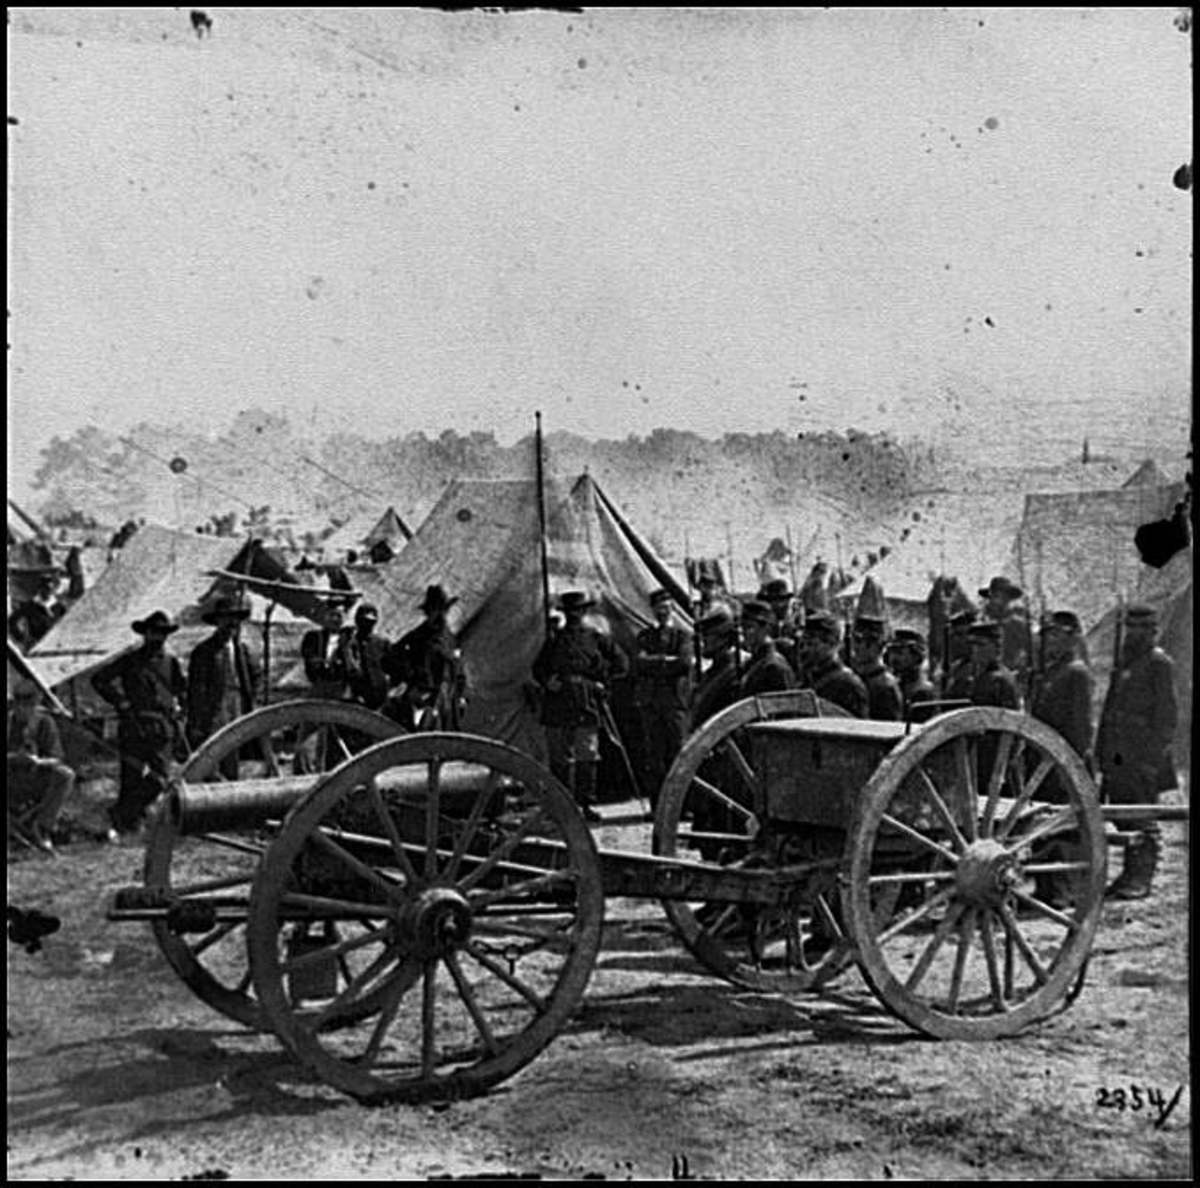 Howitzer, along with the caisson. Note the shorter barrel